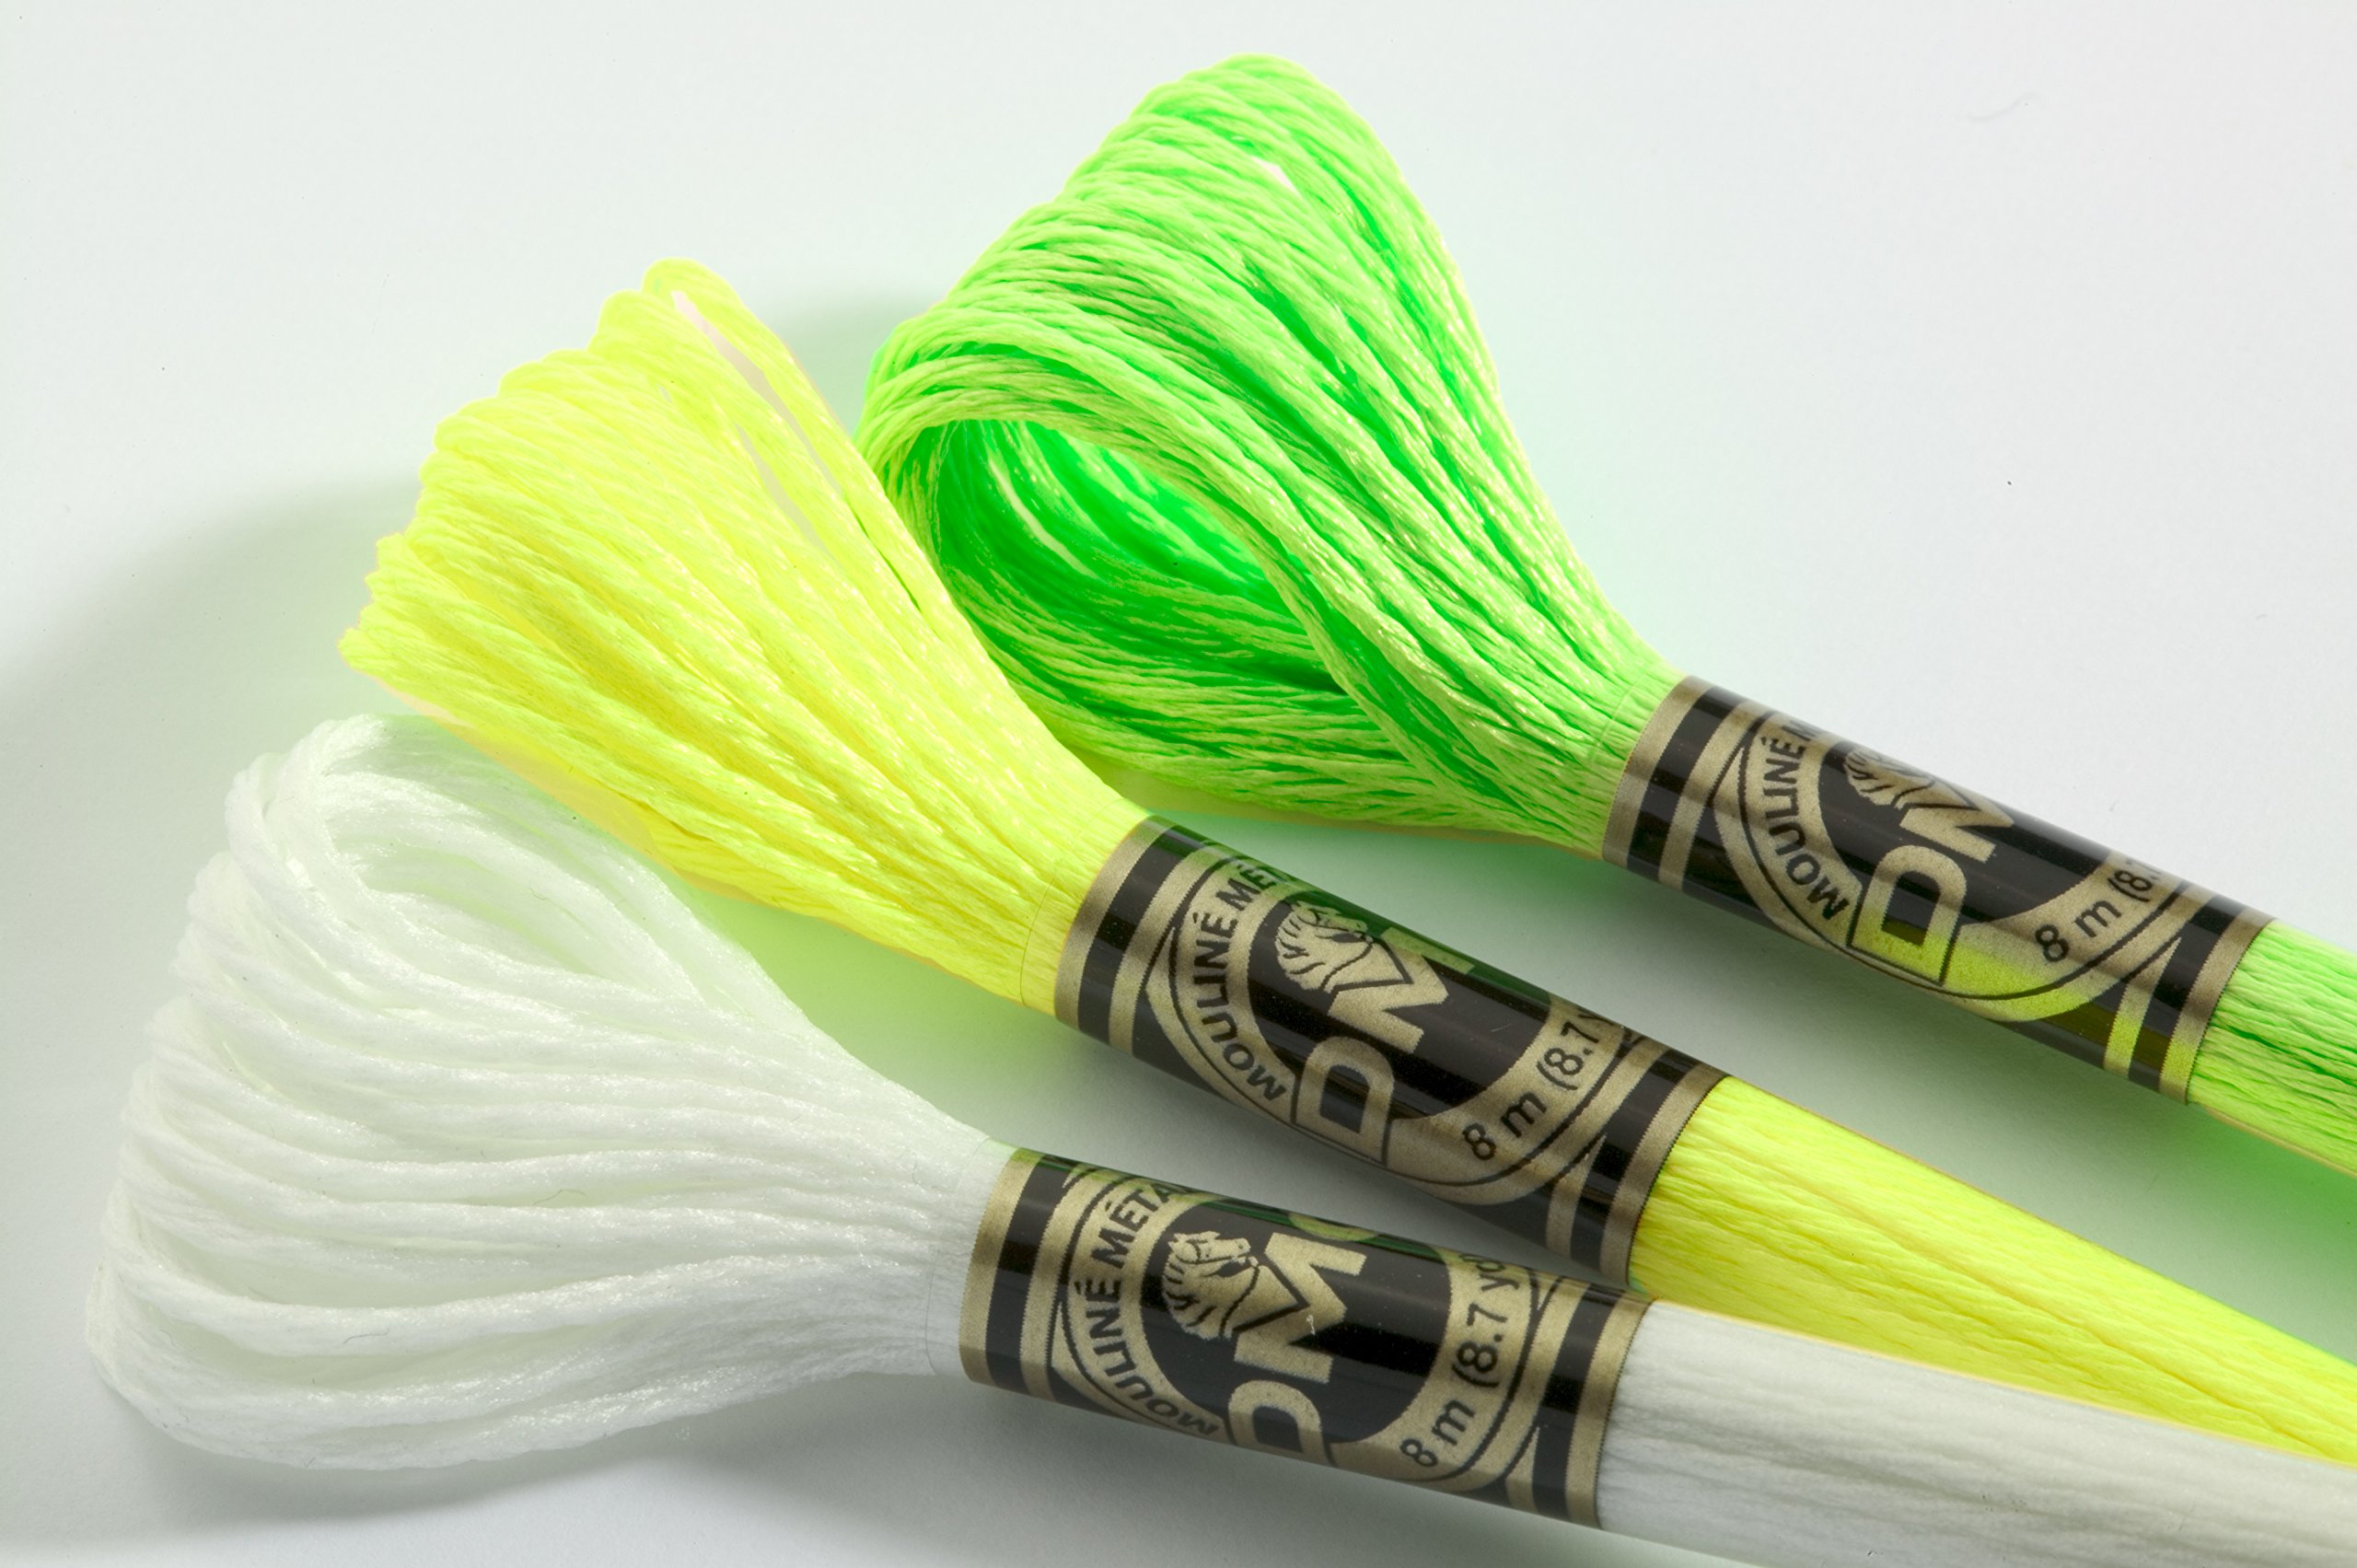 DMC 317W-E940 Light Effects Polyster Embroidery Floss, 8.7-Yard, Glow-in-The-Dark